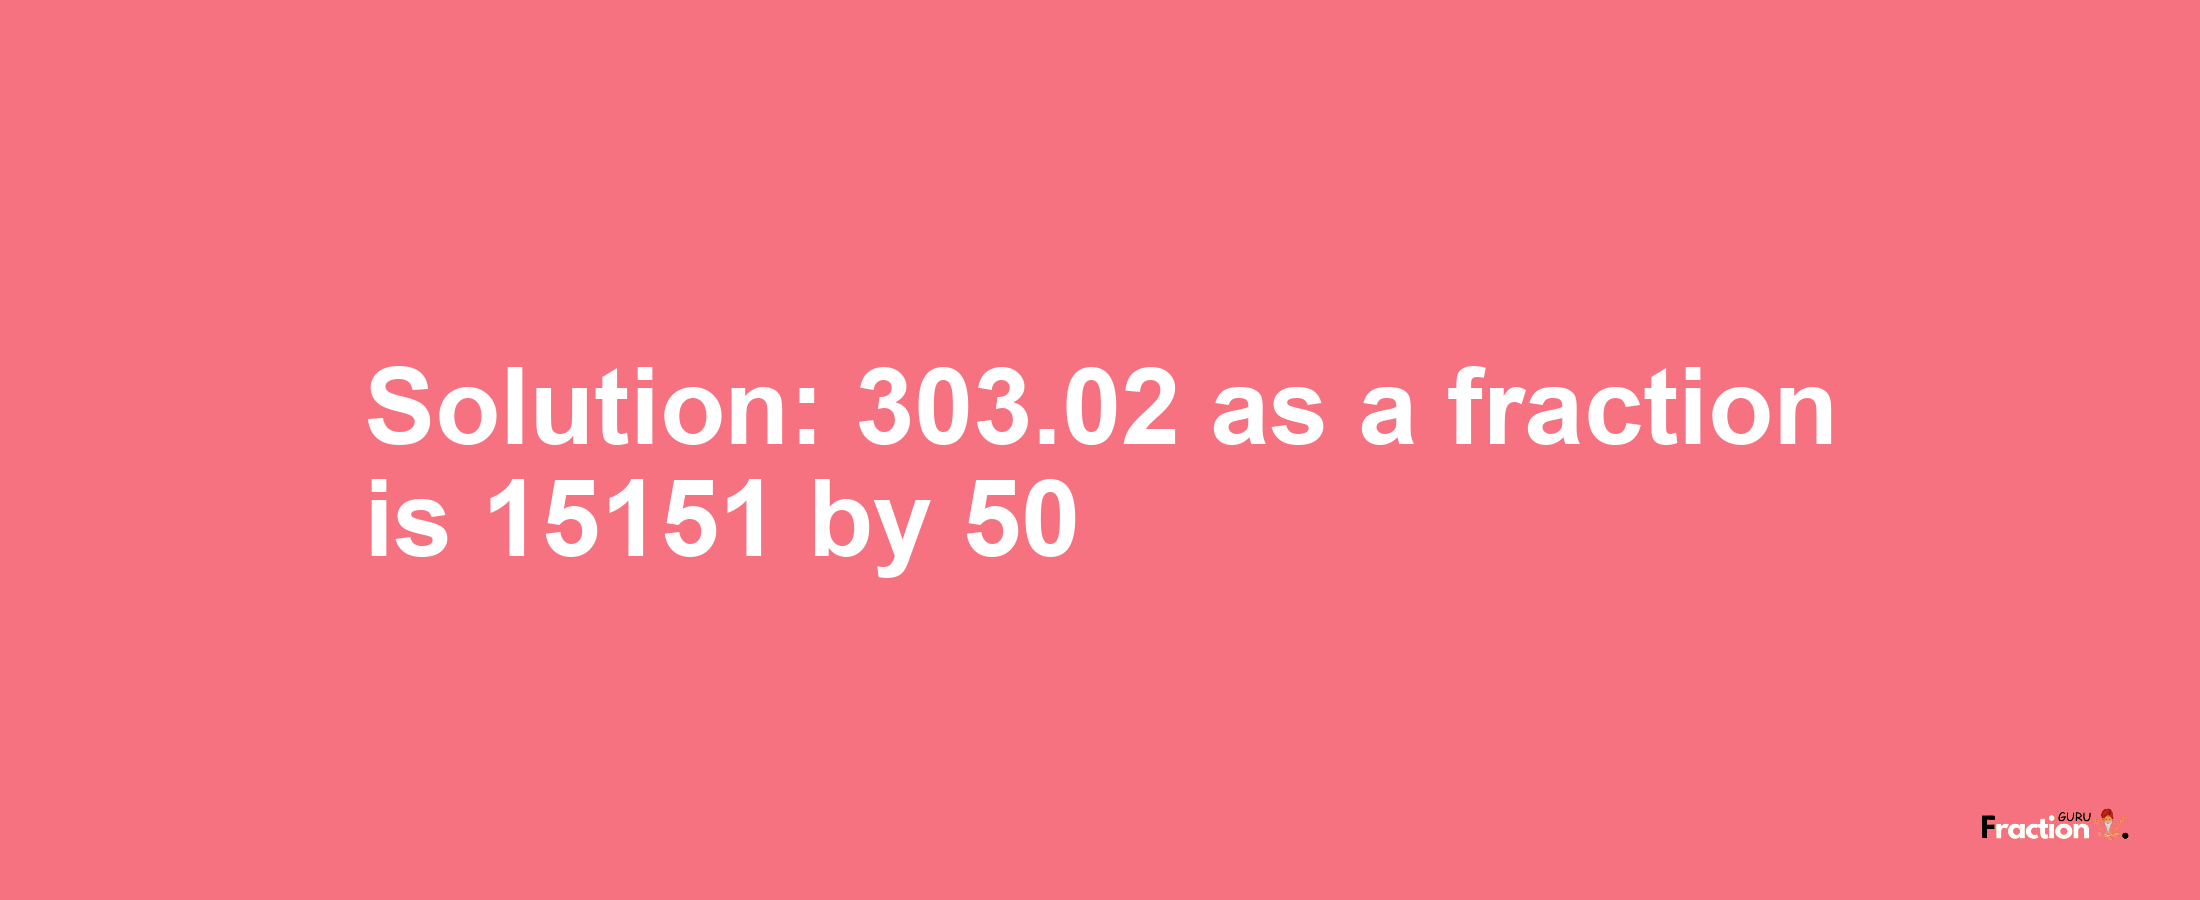 Solution:303.02 as a fraction is 15151/50